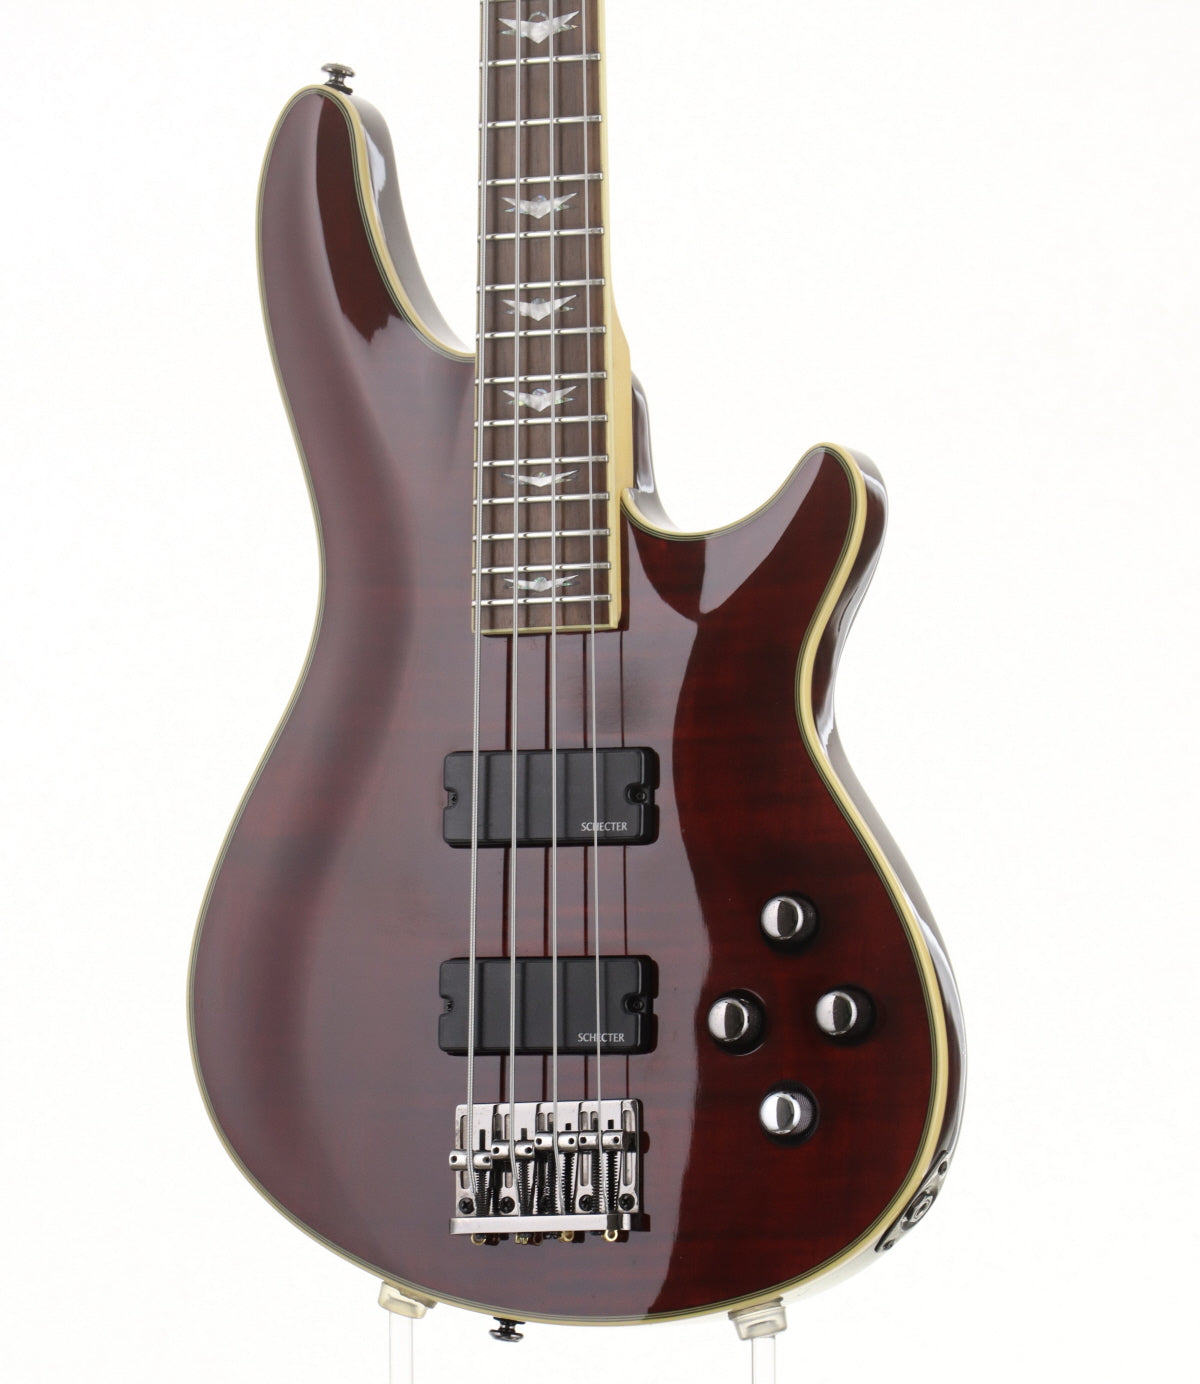 [SN N13091075] USED SCHECTER / OMENEXTREME4 AD-OM-EXT-4 electric bass [10]